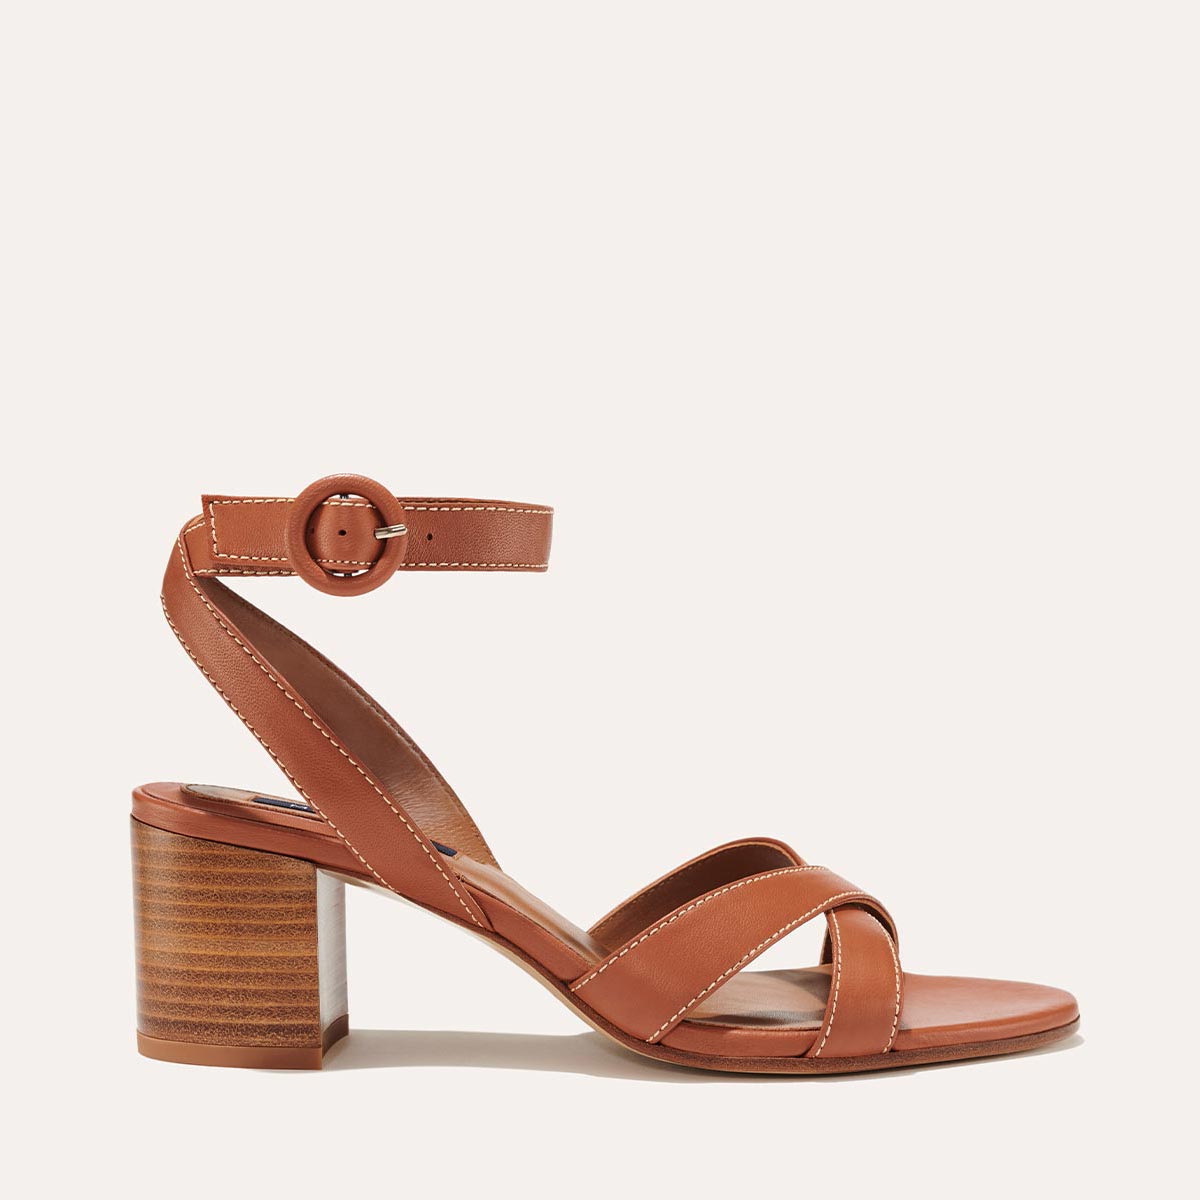 Margaux's classic City Sandal in saddle brown nappa leather with comfortable straps and a walkable block heel